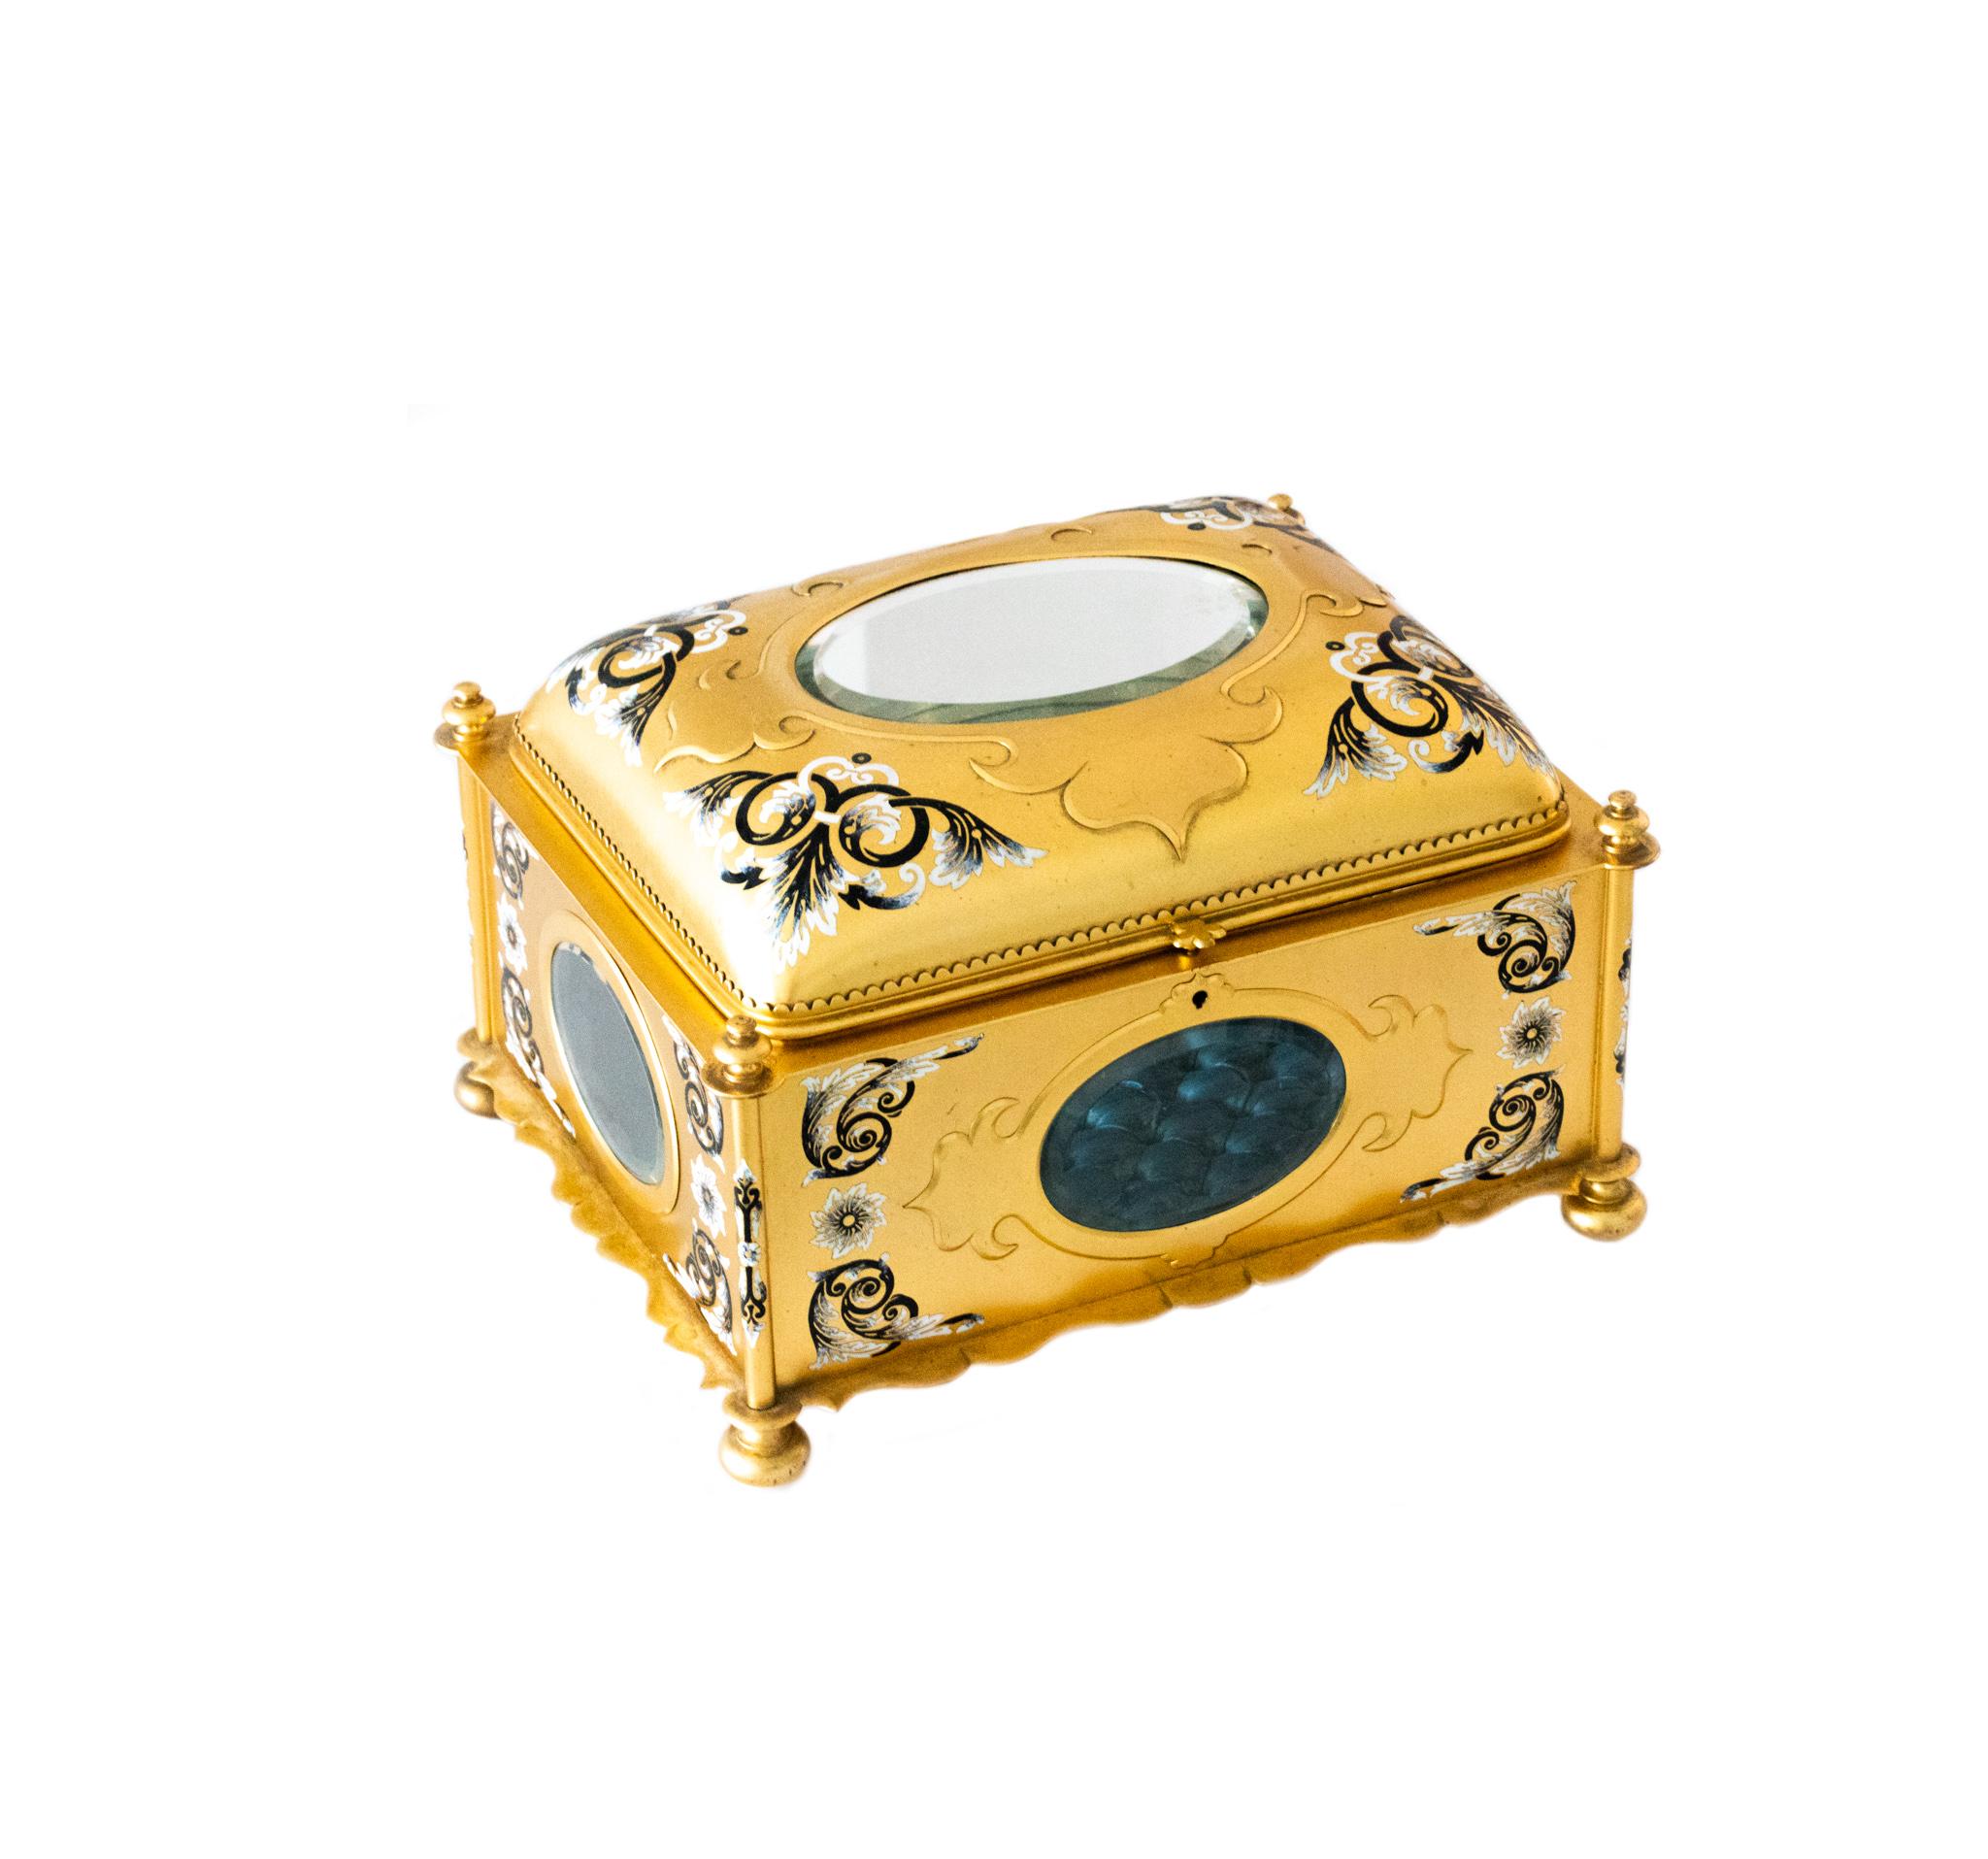 Beautiful French champleve cloisonne jewelry box.

An antique storage jewelry box case, made in Paris France during the Napoleon III, third empire period, circa 1860s. This magnificent highly decorated case, was crafted in solid ormolu bronze with